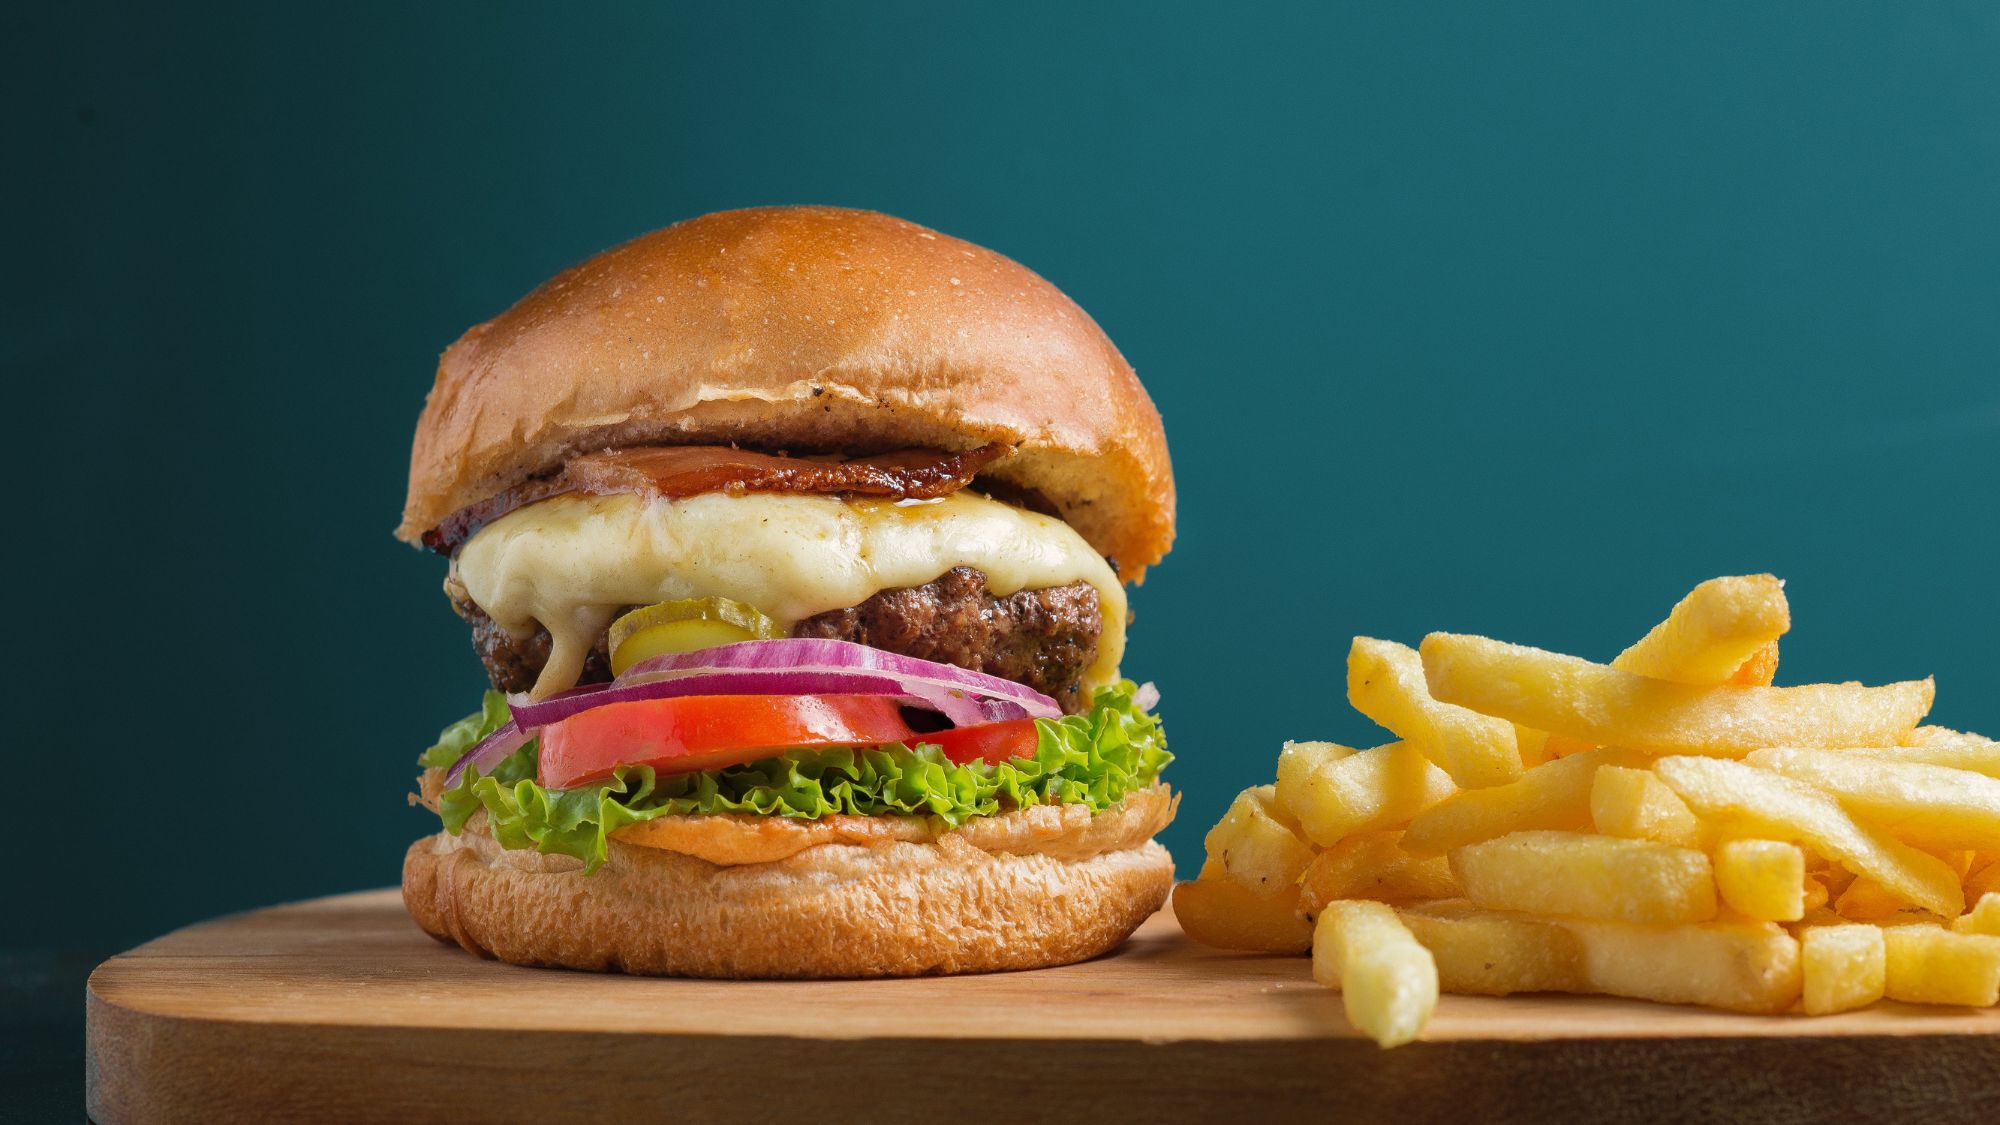 A photo of a hamburger and french fries on a wooden cutting board, representing unhealthy effects of daily fast food consumption.